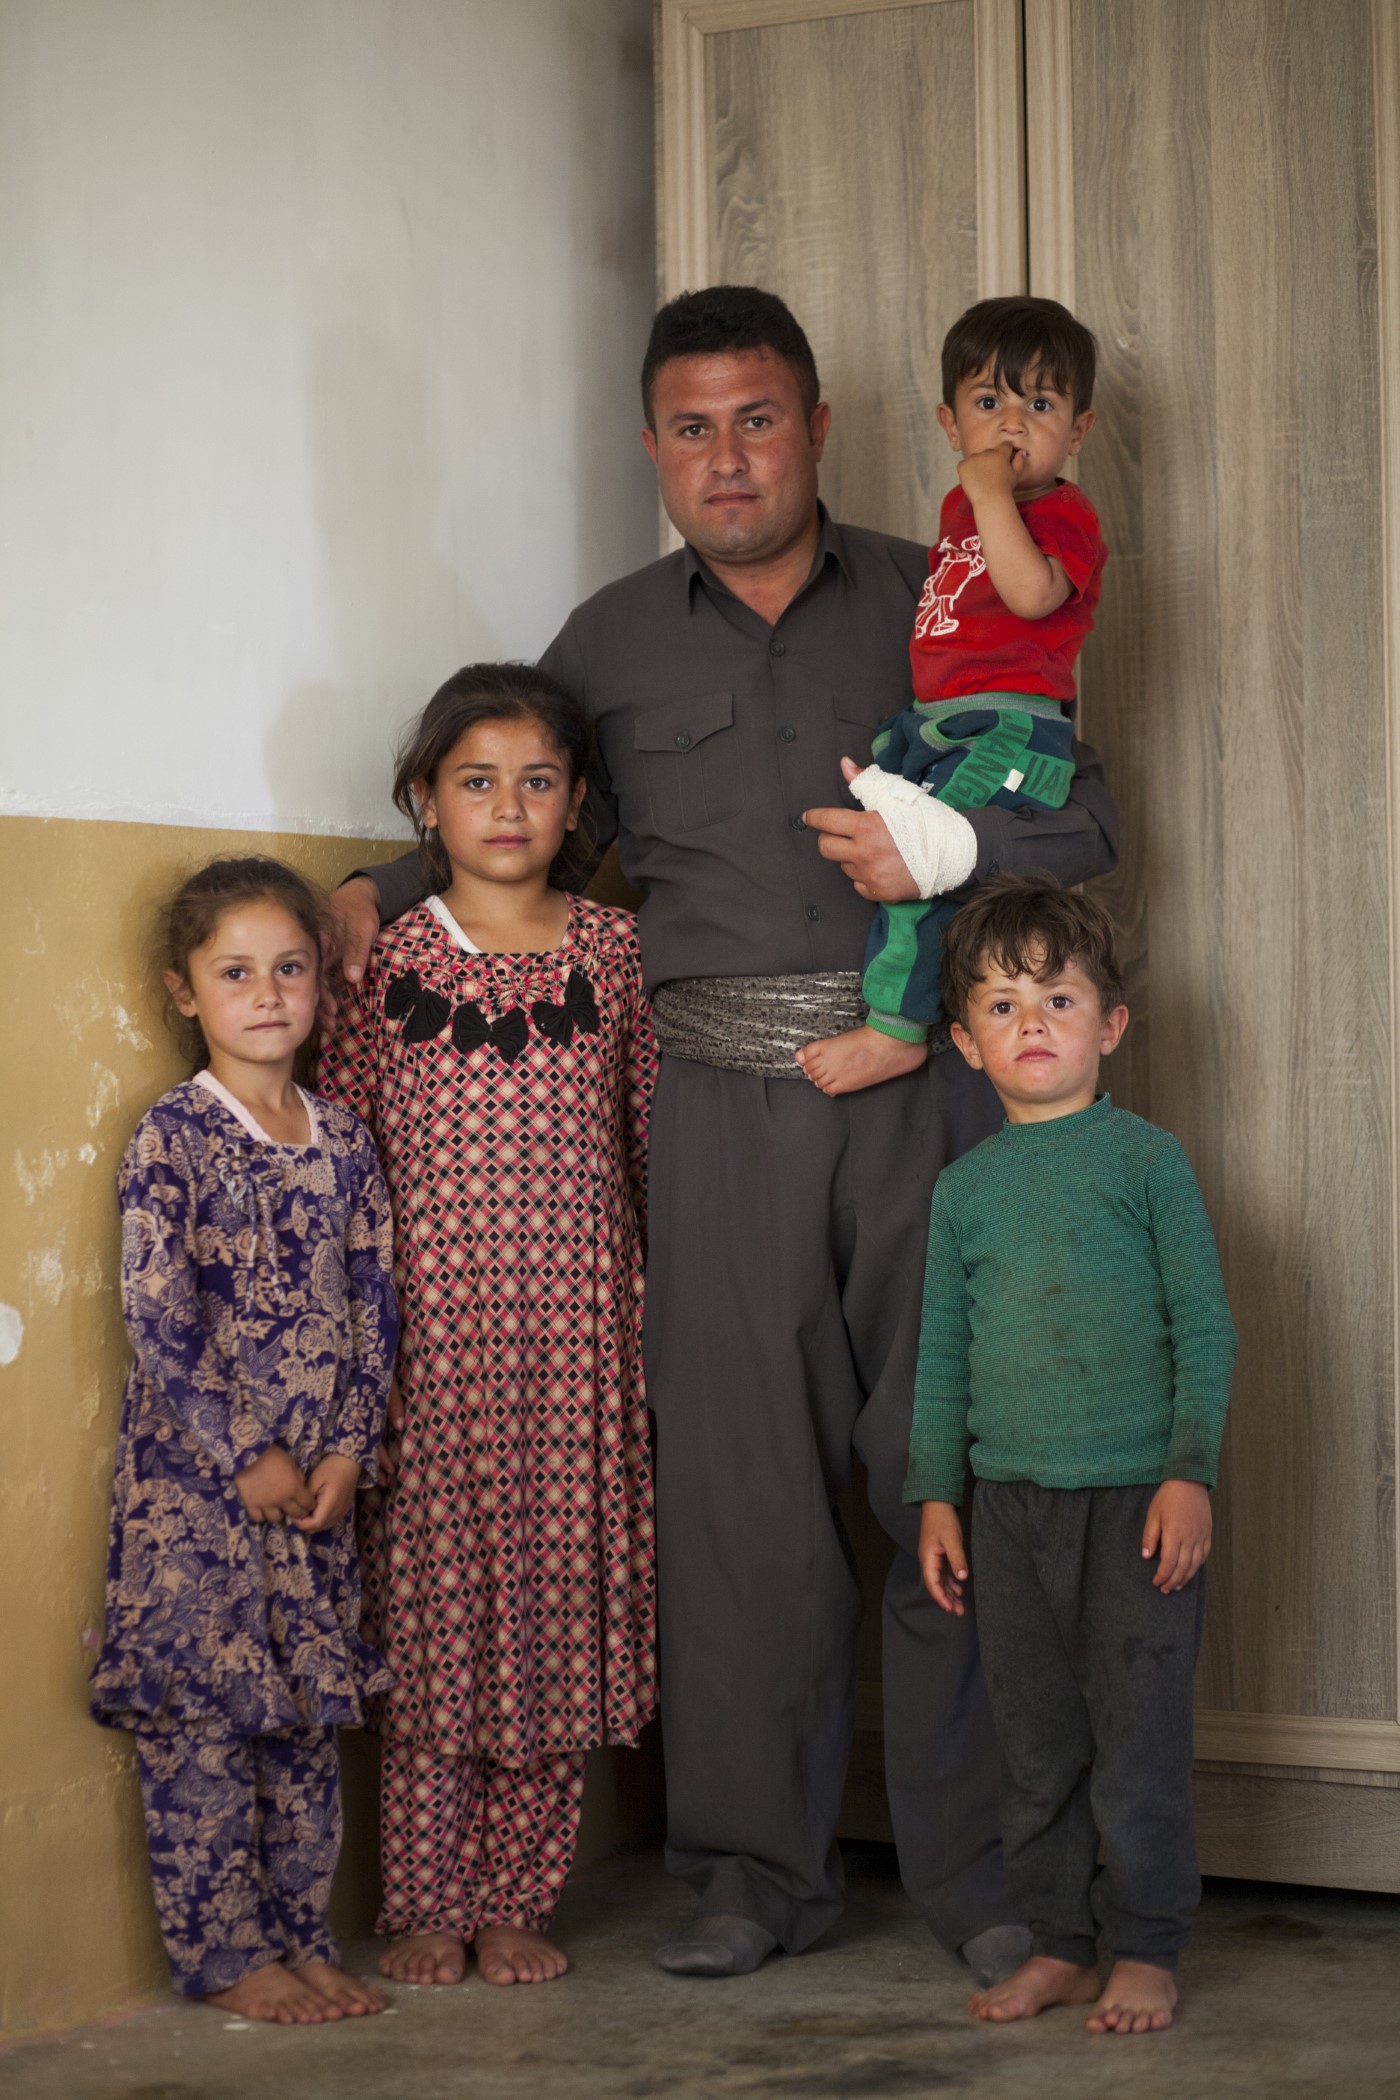 Abdulla (34), former Peshmerga, poses before the camera with his family. A bullet went through his neck in 2016 while fighting the IS in Kirkuk. After being resucitated he remained unconscious for five days in hospital, and spent months unable to talk, see or eat. The bullet caused paralysis. Currently (2017), he has been in bed for 7 months requiring constant care. He did not fight for any political party, but to see his children grow up. Ranya, Kurdistan, Iraq. May 14, 2017